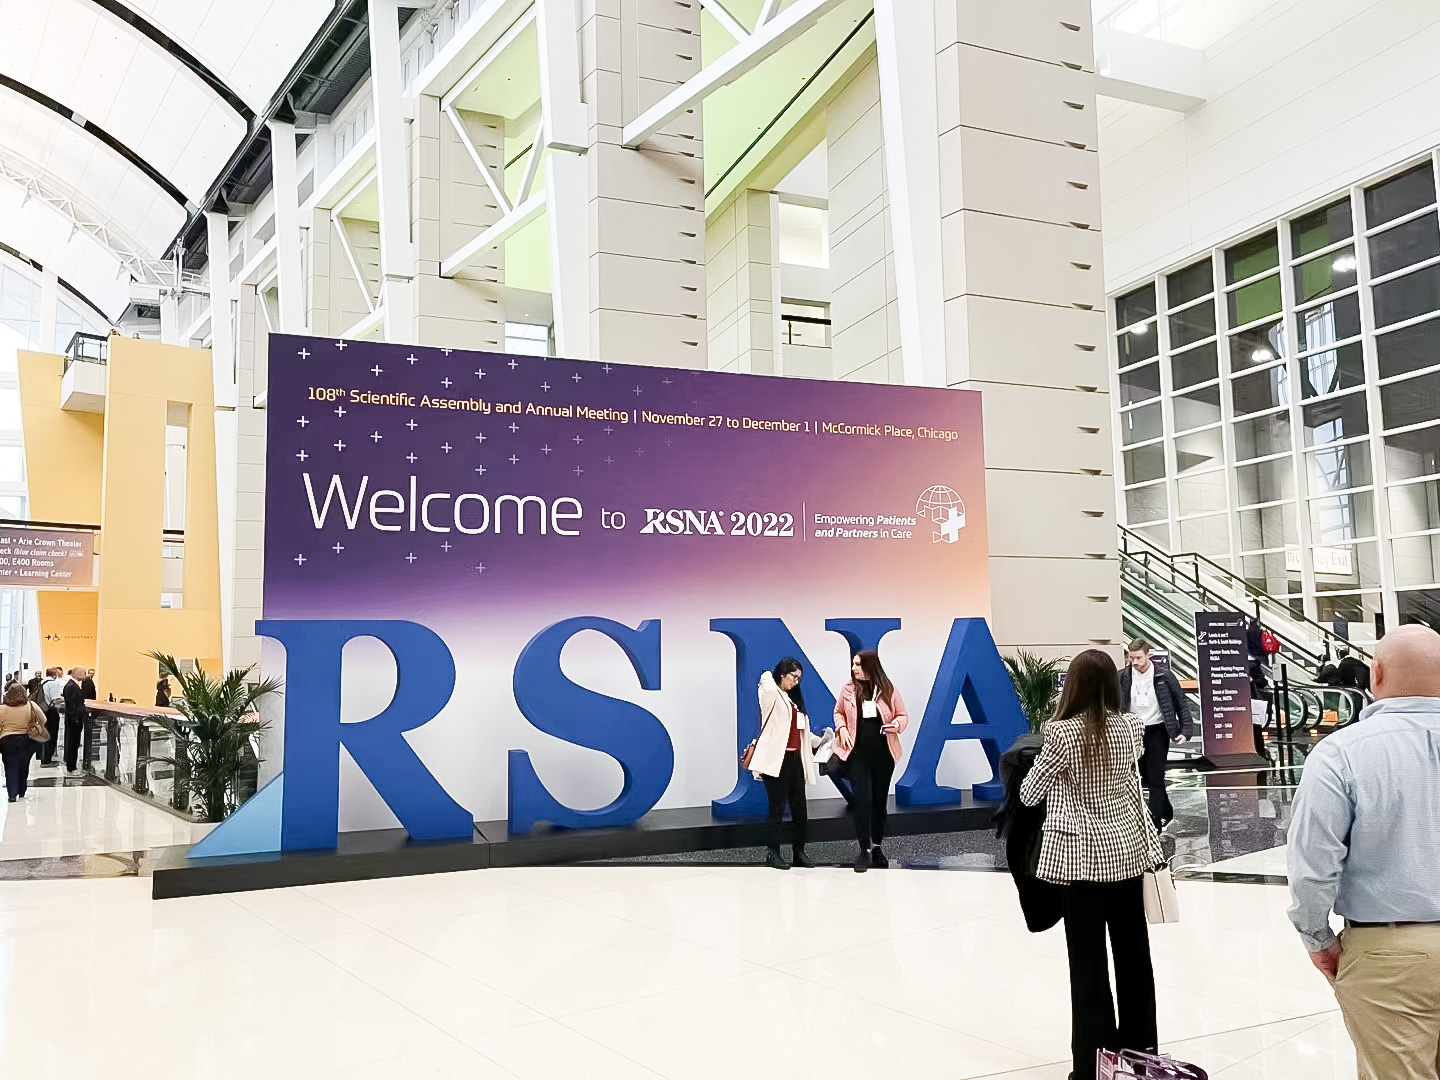 Exhibiting RSNA 2022: A professional event for X-rays